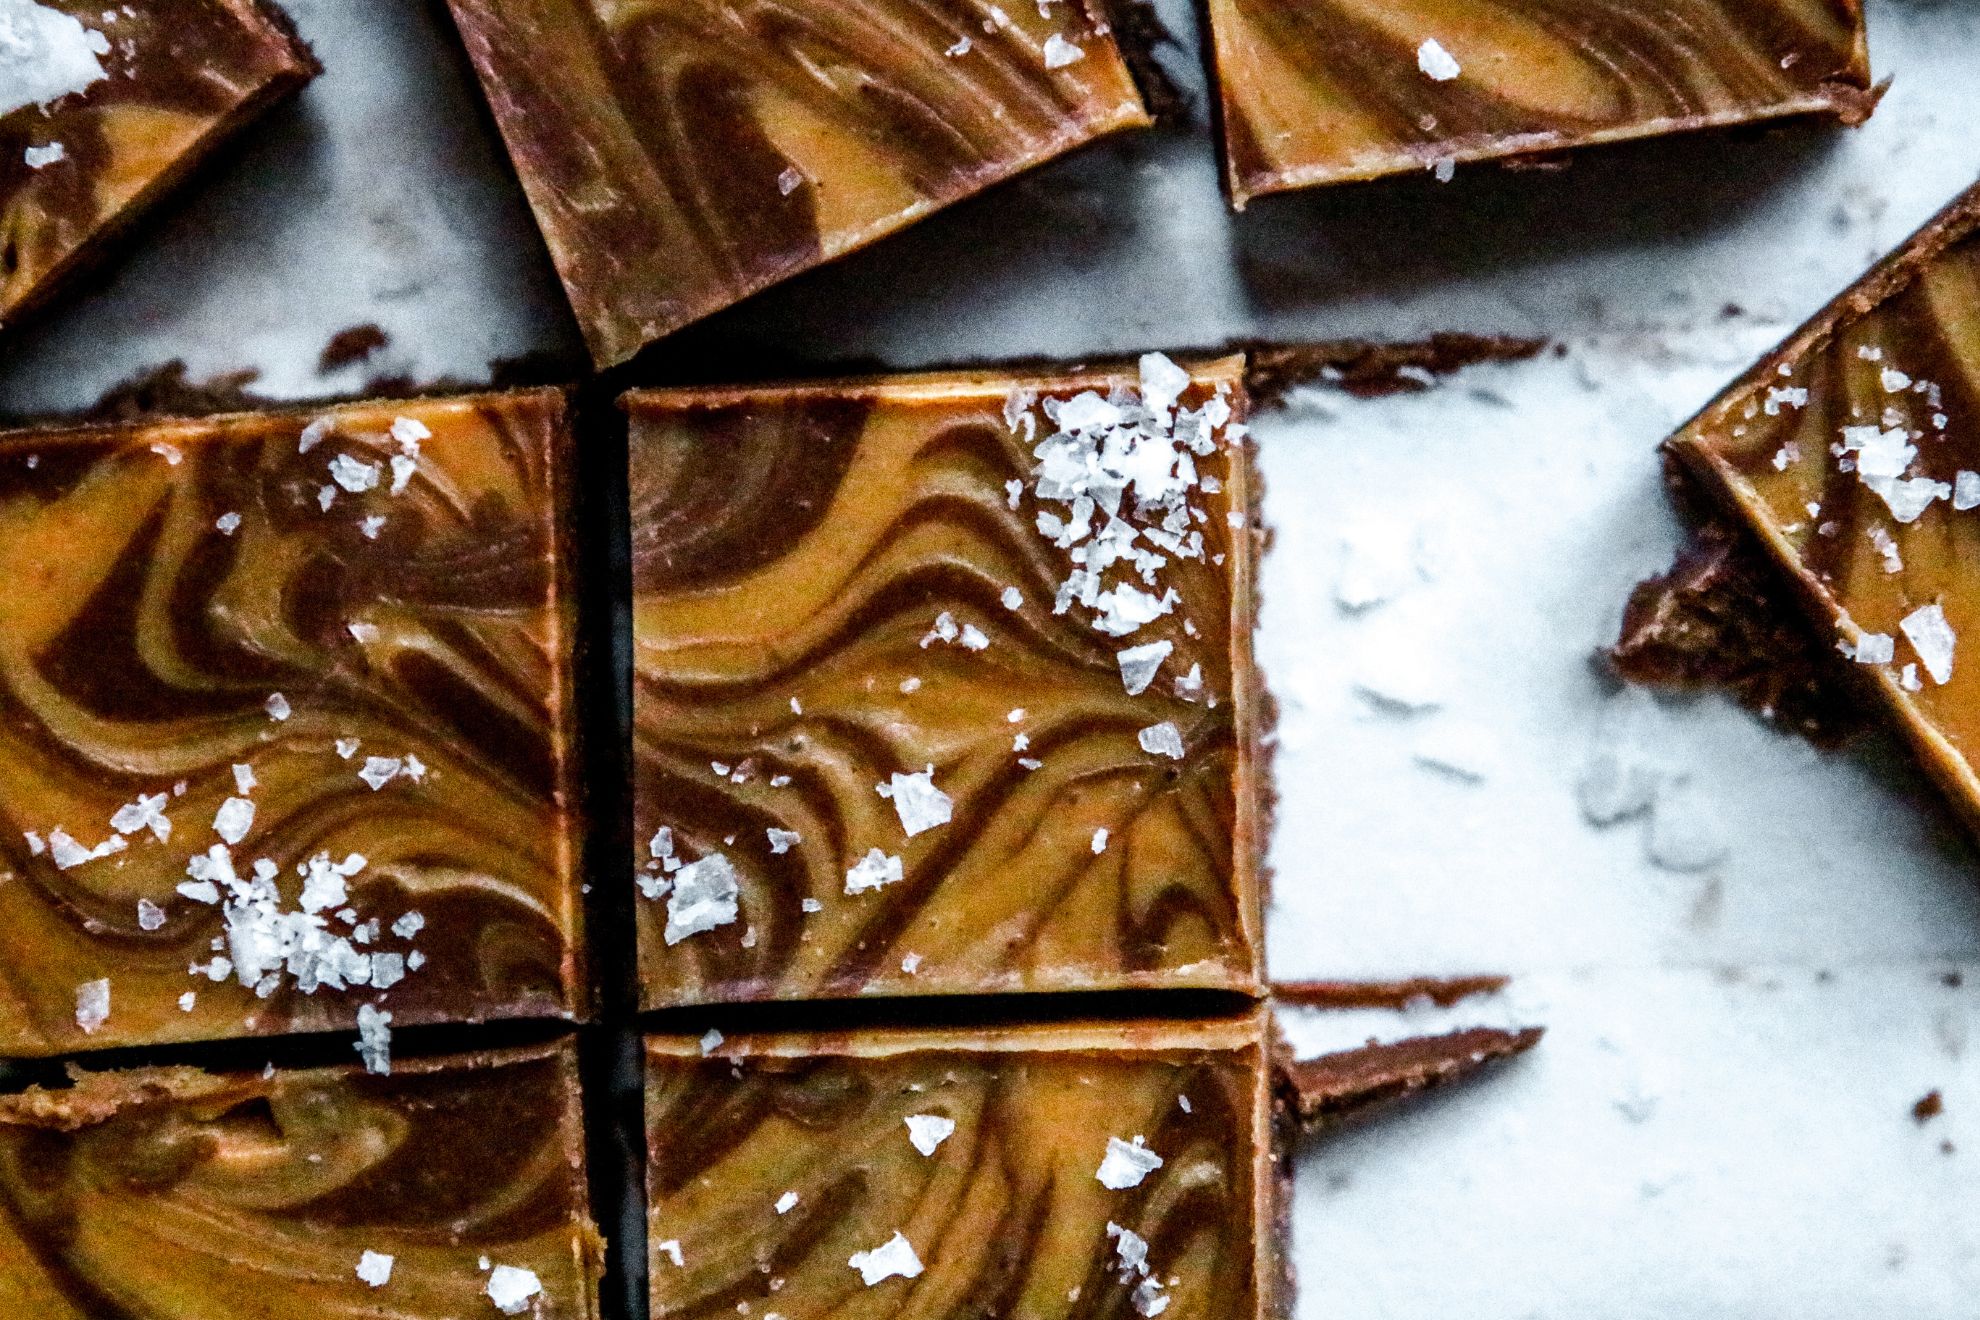 This is an overhead image of chocolate and peanut butter swirl fudge cut into squares. The fudge squares are topped with salt and are on a piece of white parchment paper.